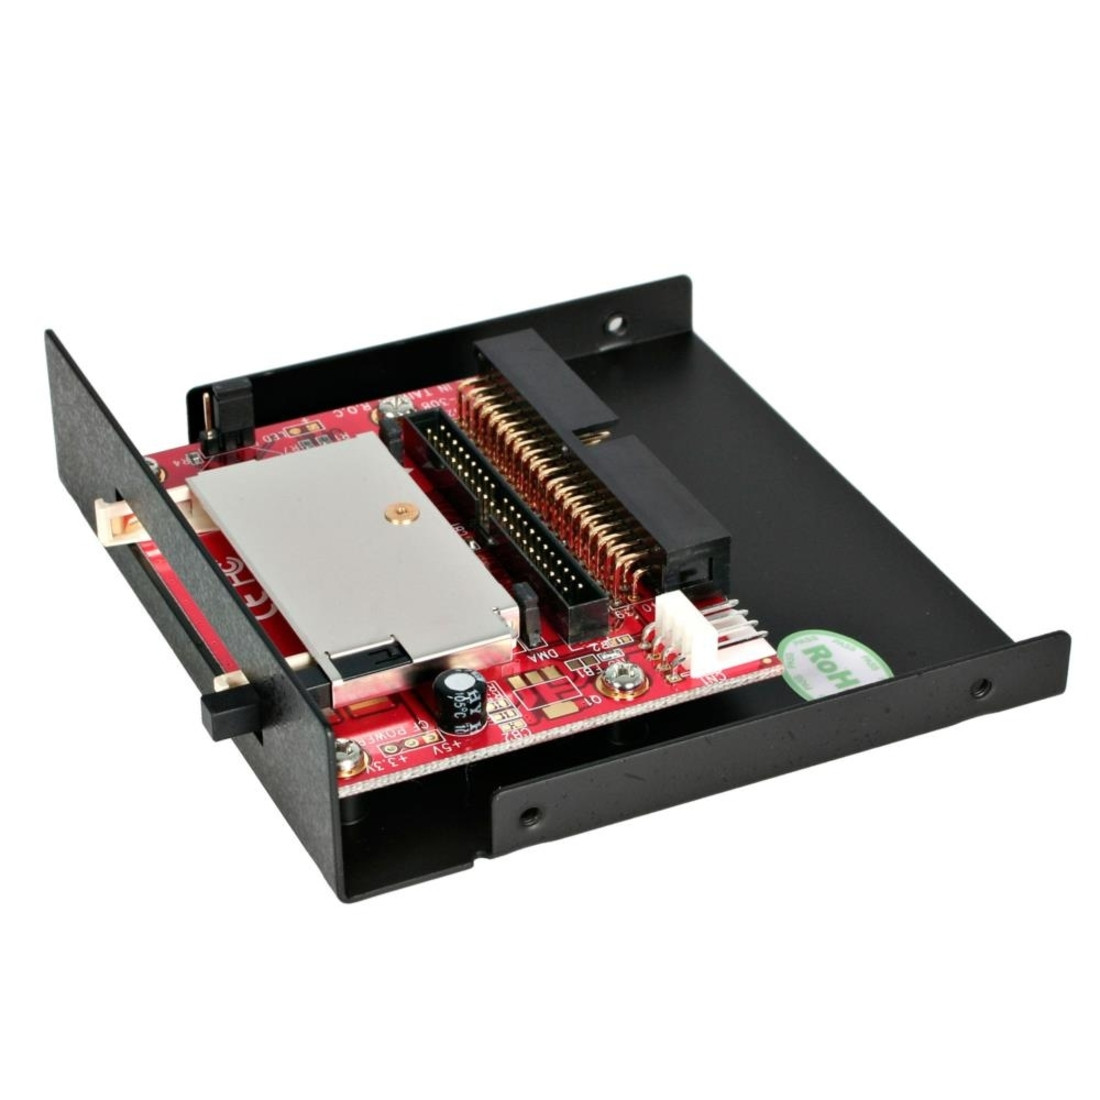 Startech .com 3.5in Drive Bay IDE to Single CF SSD Adapter Card ReaderCompactFlash Type I 35BAYCF2IDE